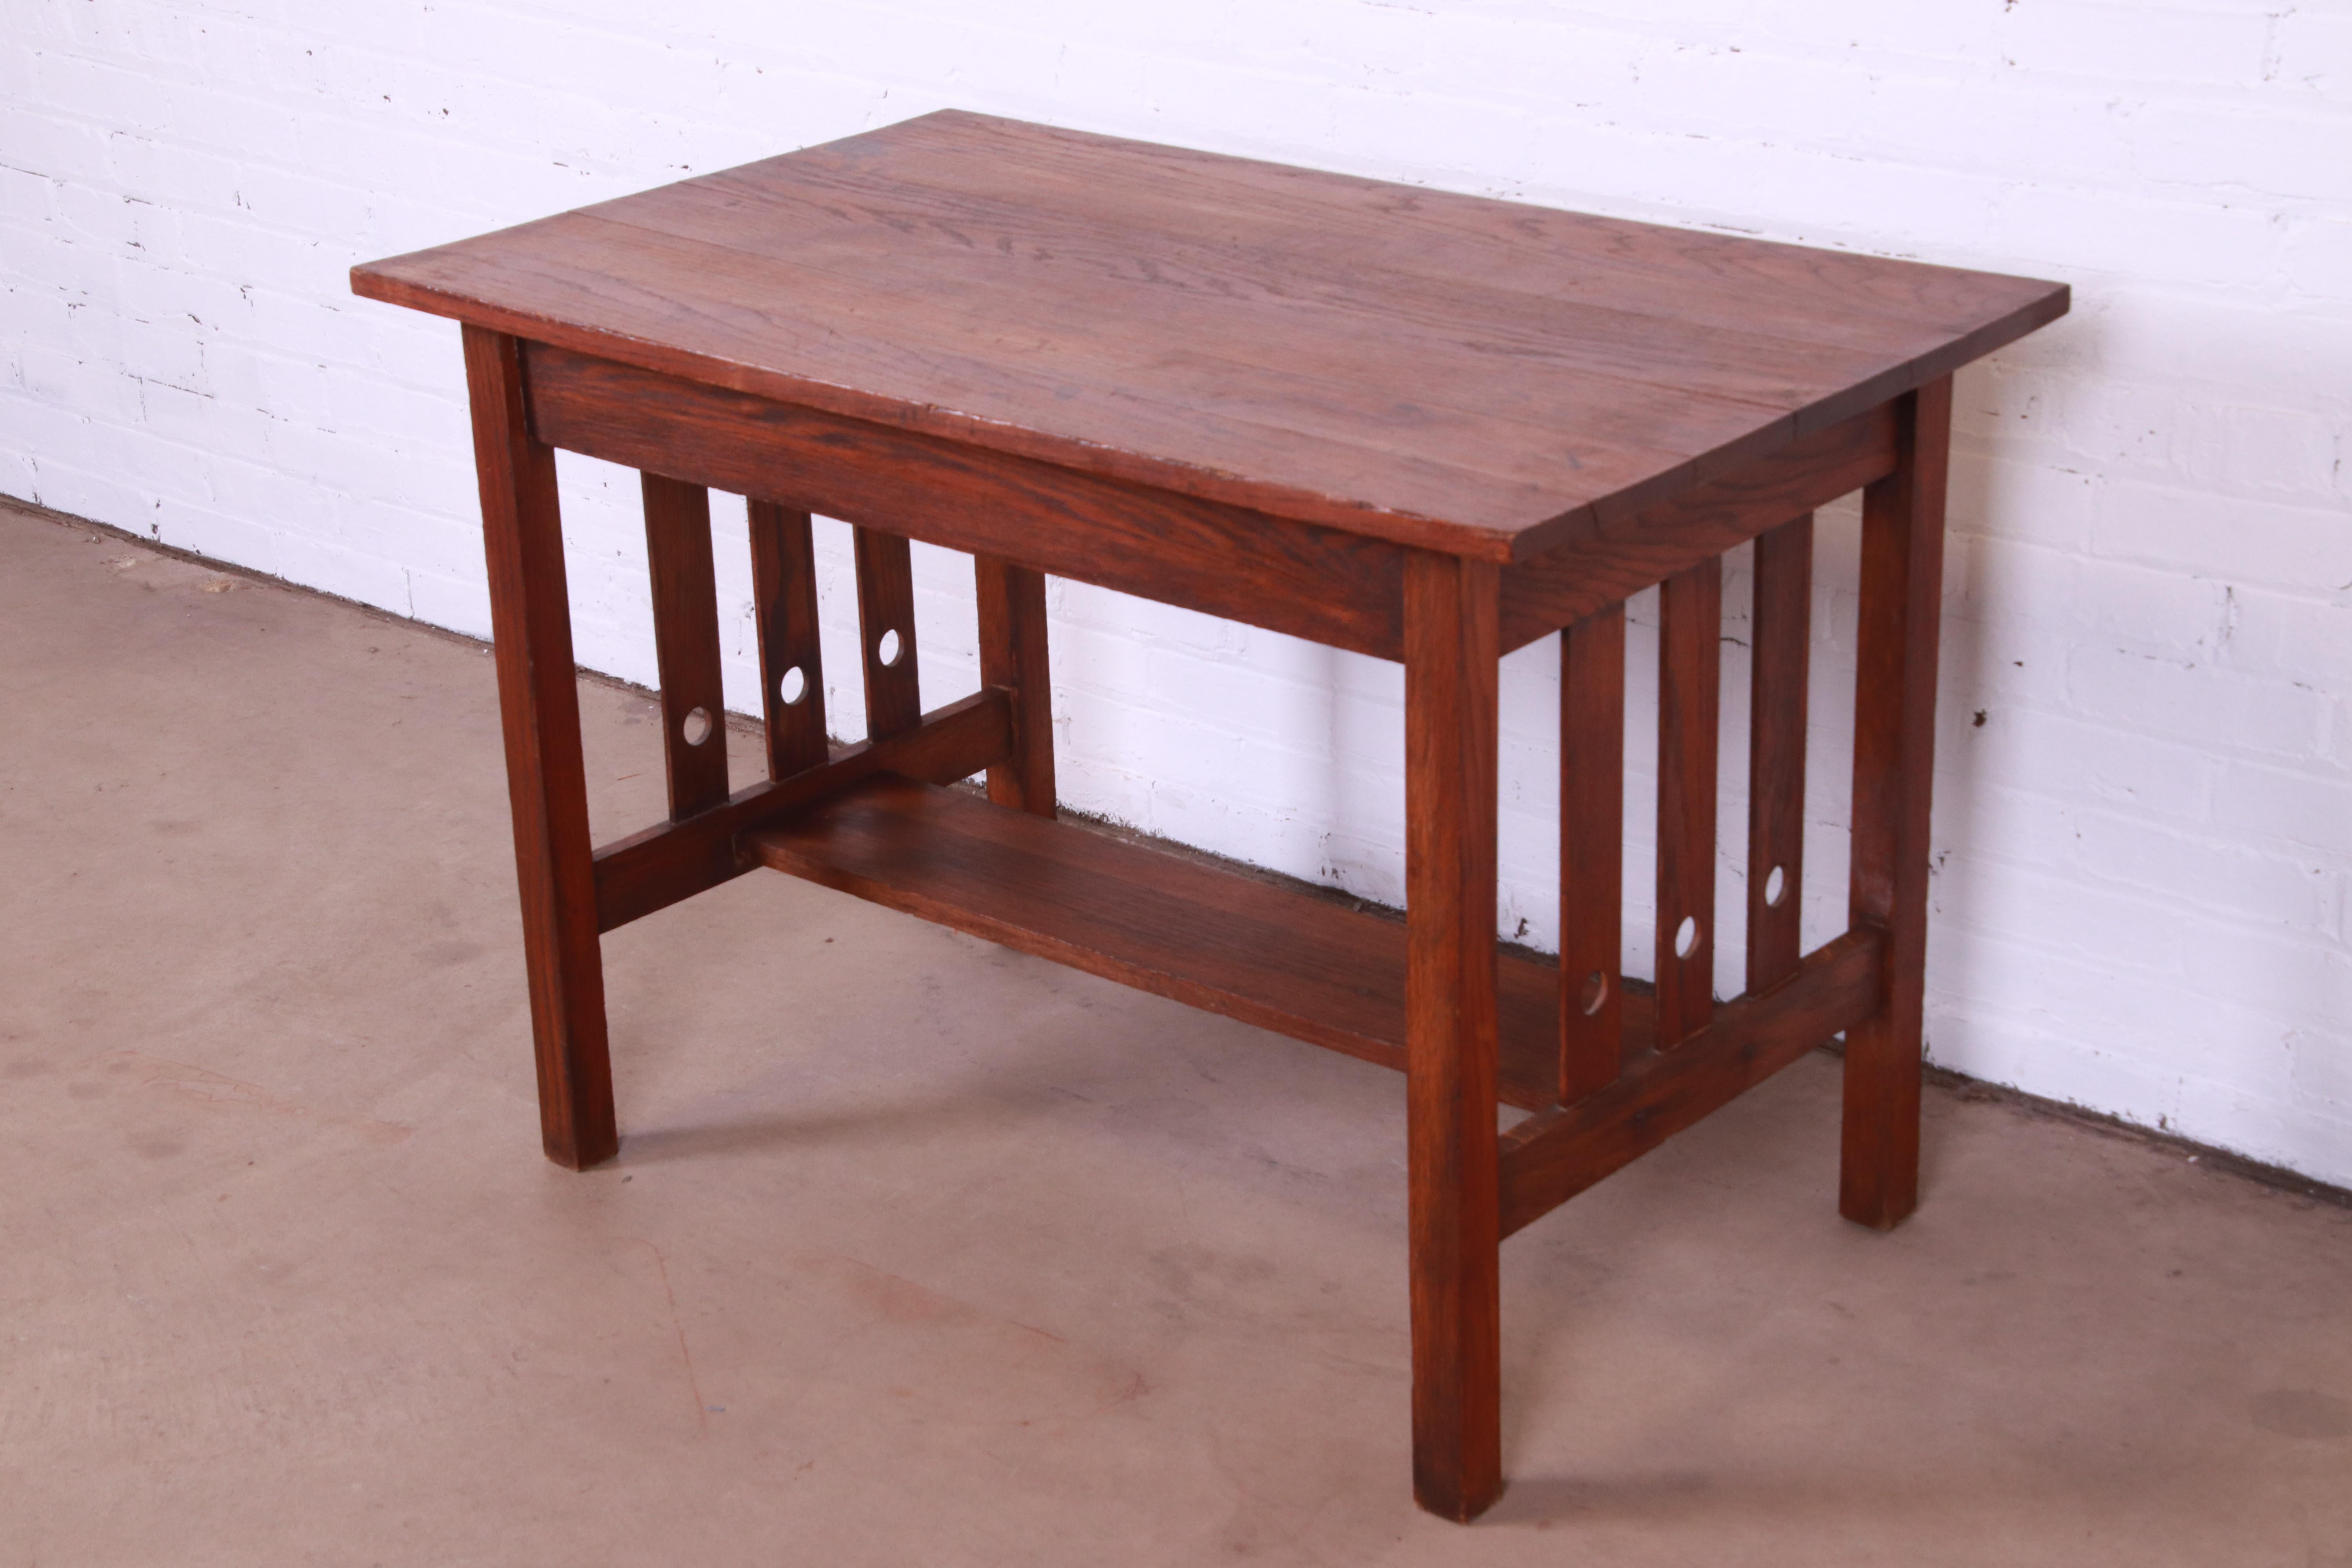 A beautiful Mission oak Arts & Crafts writing desk, library table, or center table

Recently procured from Frank Lloyd Wright's DeRhodes House

In the manner of Stickley Brothers

USA, Circa 1900

Measures: 42